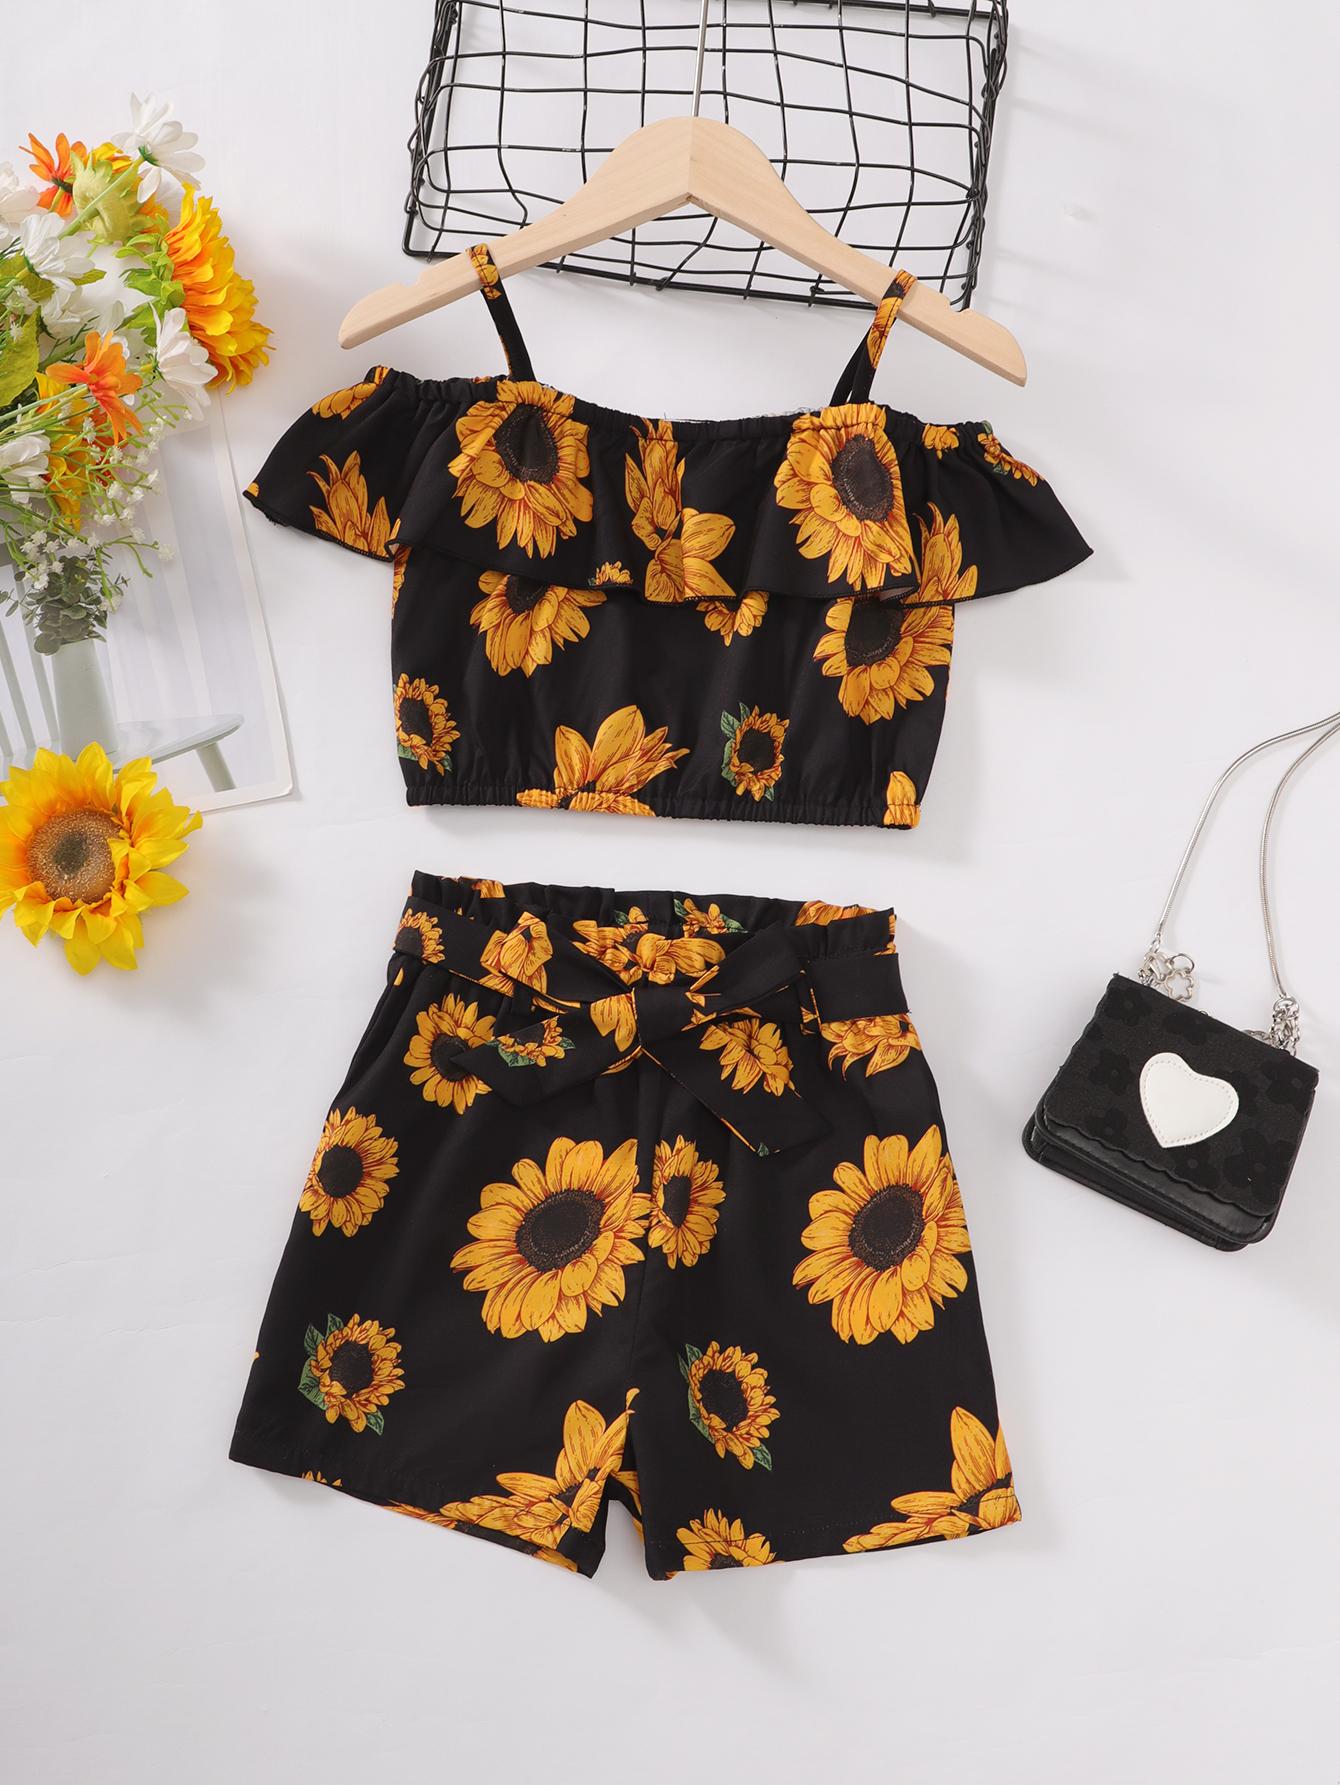 5-14Y Ready Stock Kids Girls Summer Outfits Sunflower Print Straps Lotus Leaf Collar Tops Elastic Shorts 2Pcs Clothes Set Black Catpapa 462302006